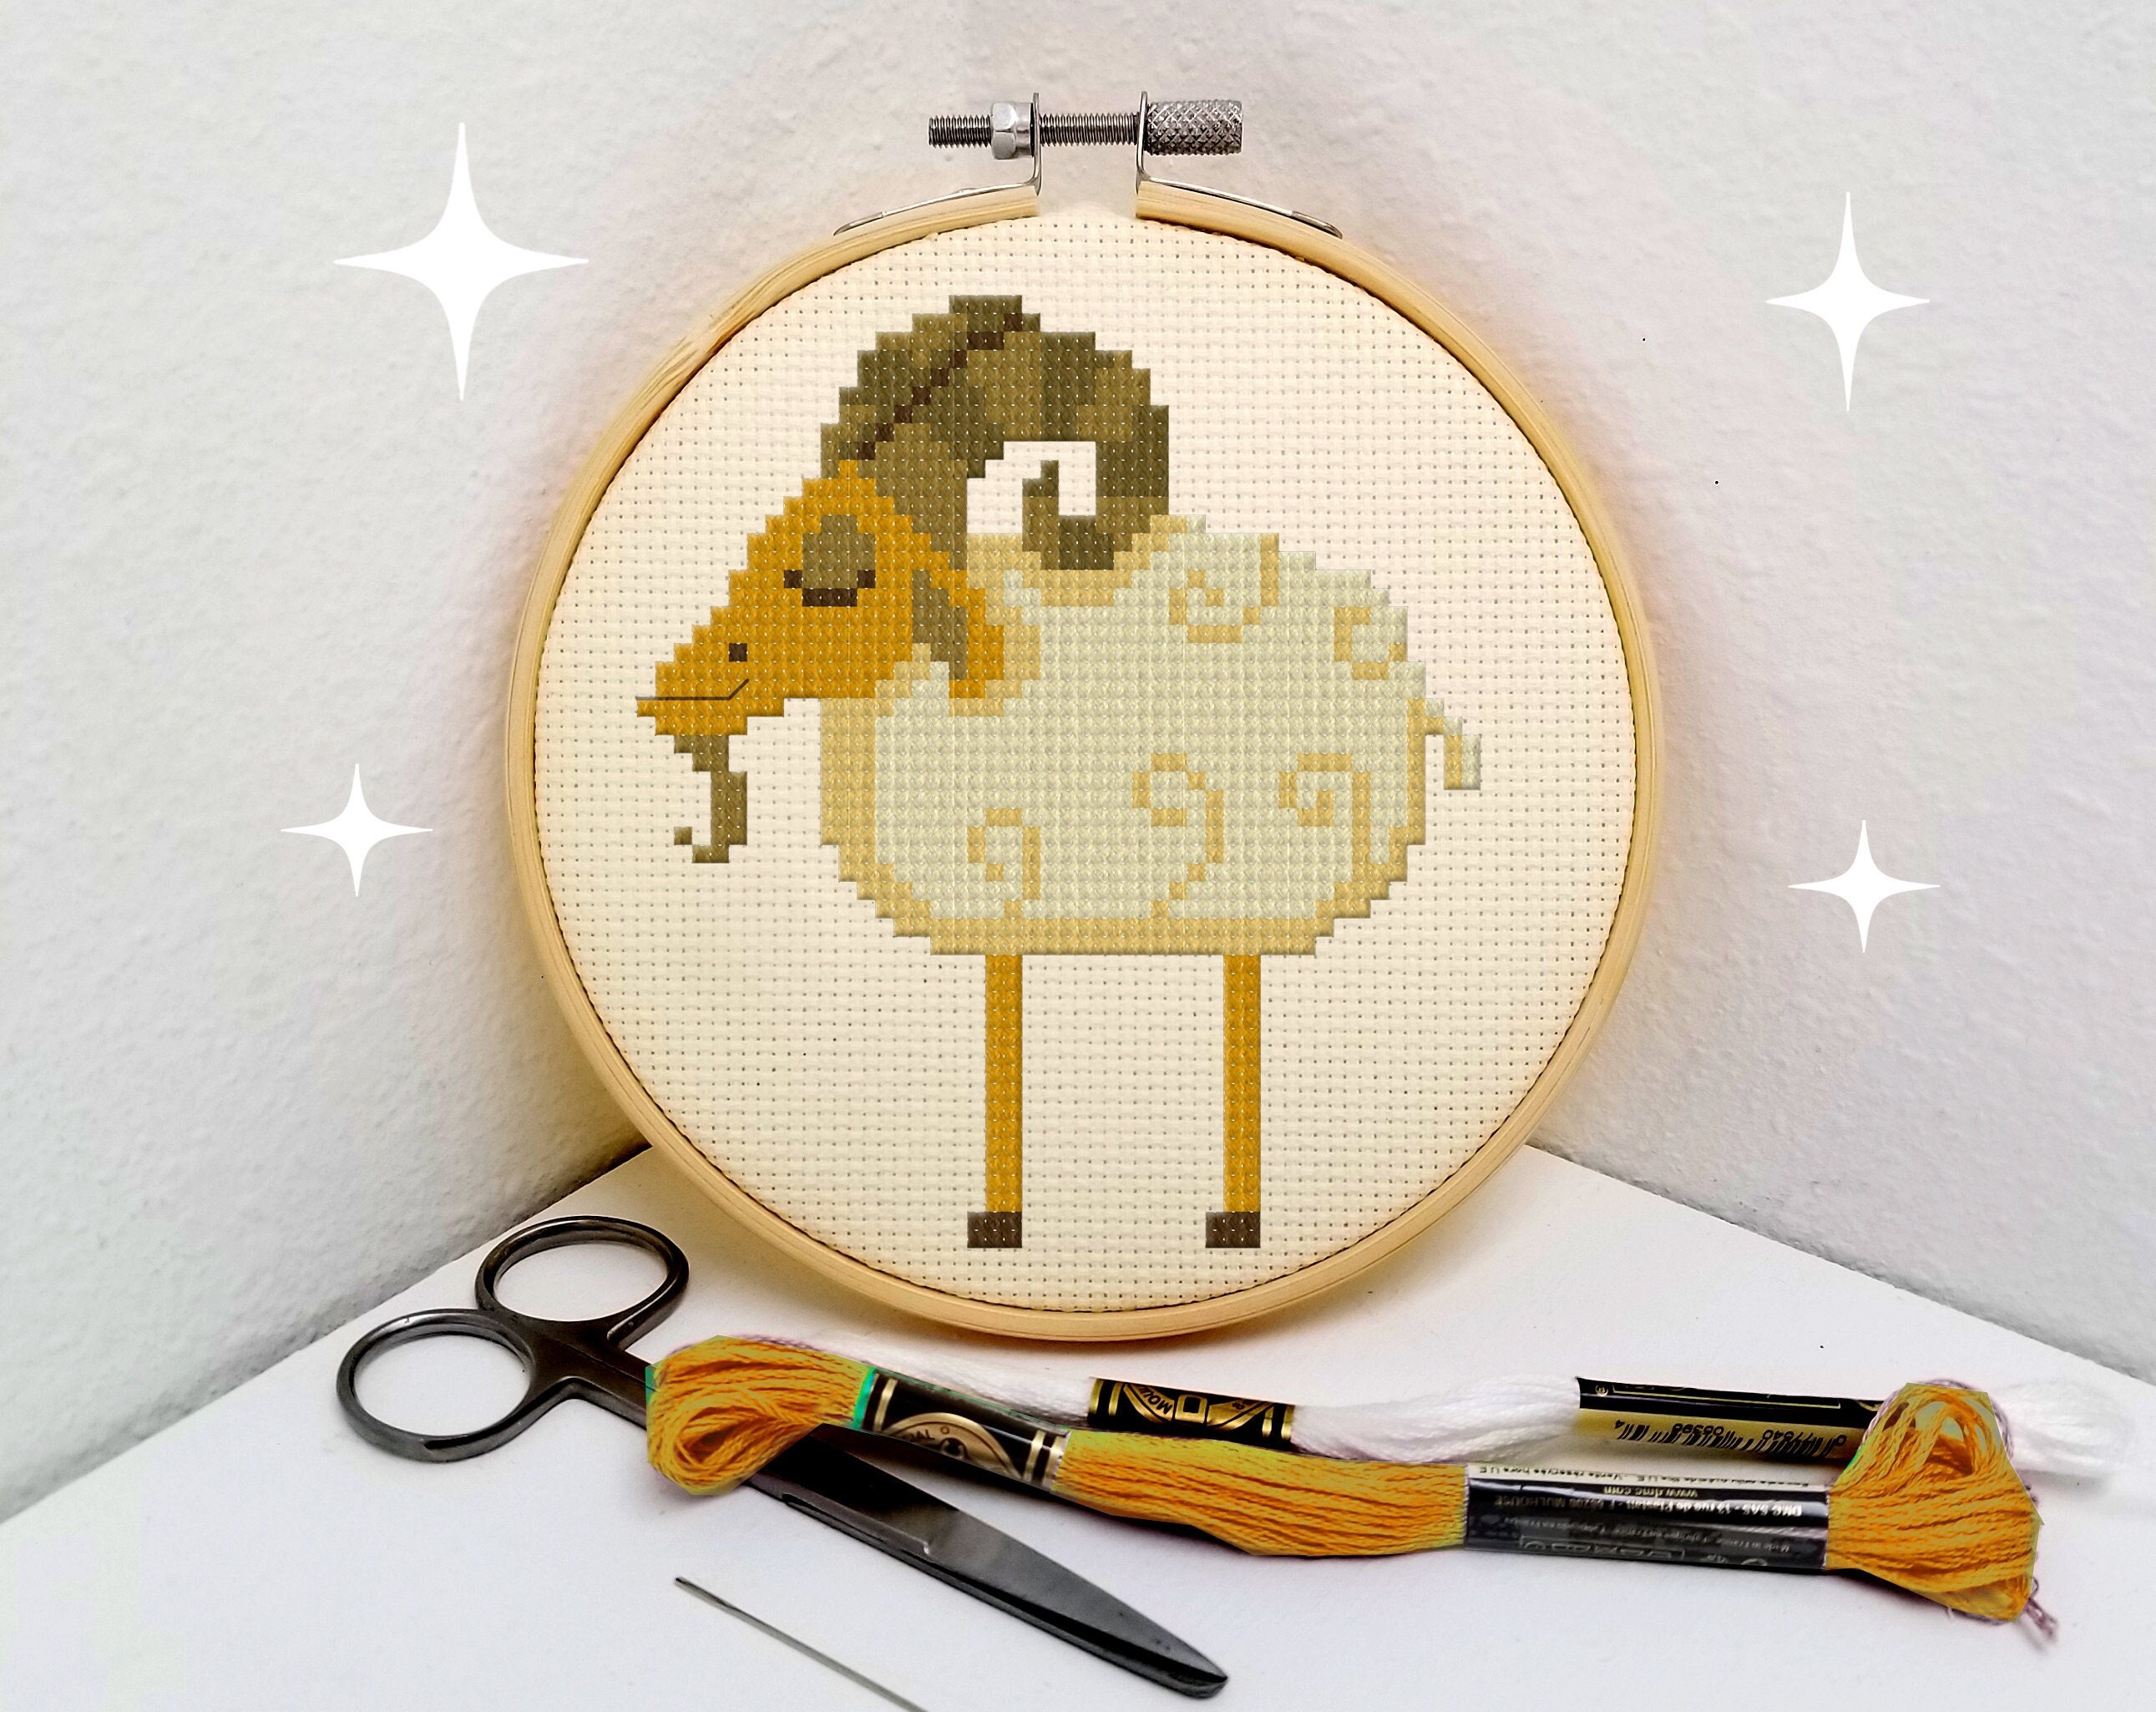 Mountain Goat Ram Cross Stitch Pattern Pdf Mid Century Modern Retrp Aries  Needlepoint Cute, Easy Great for Beginners by Maude - Etsy